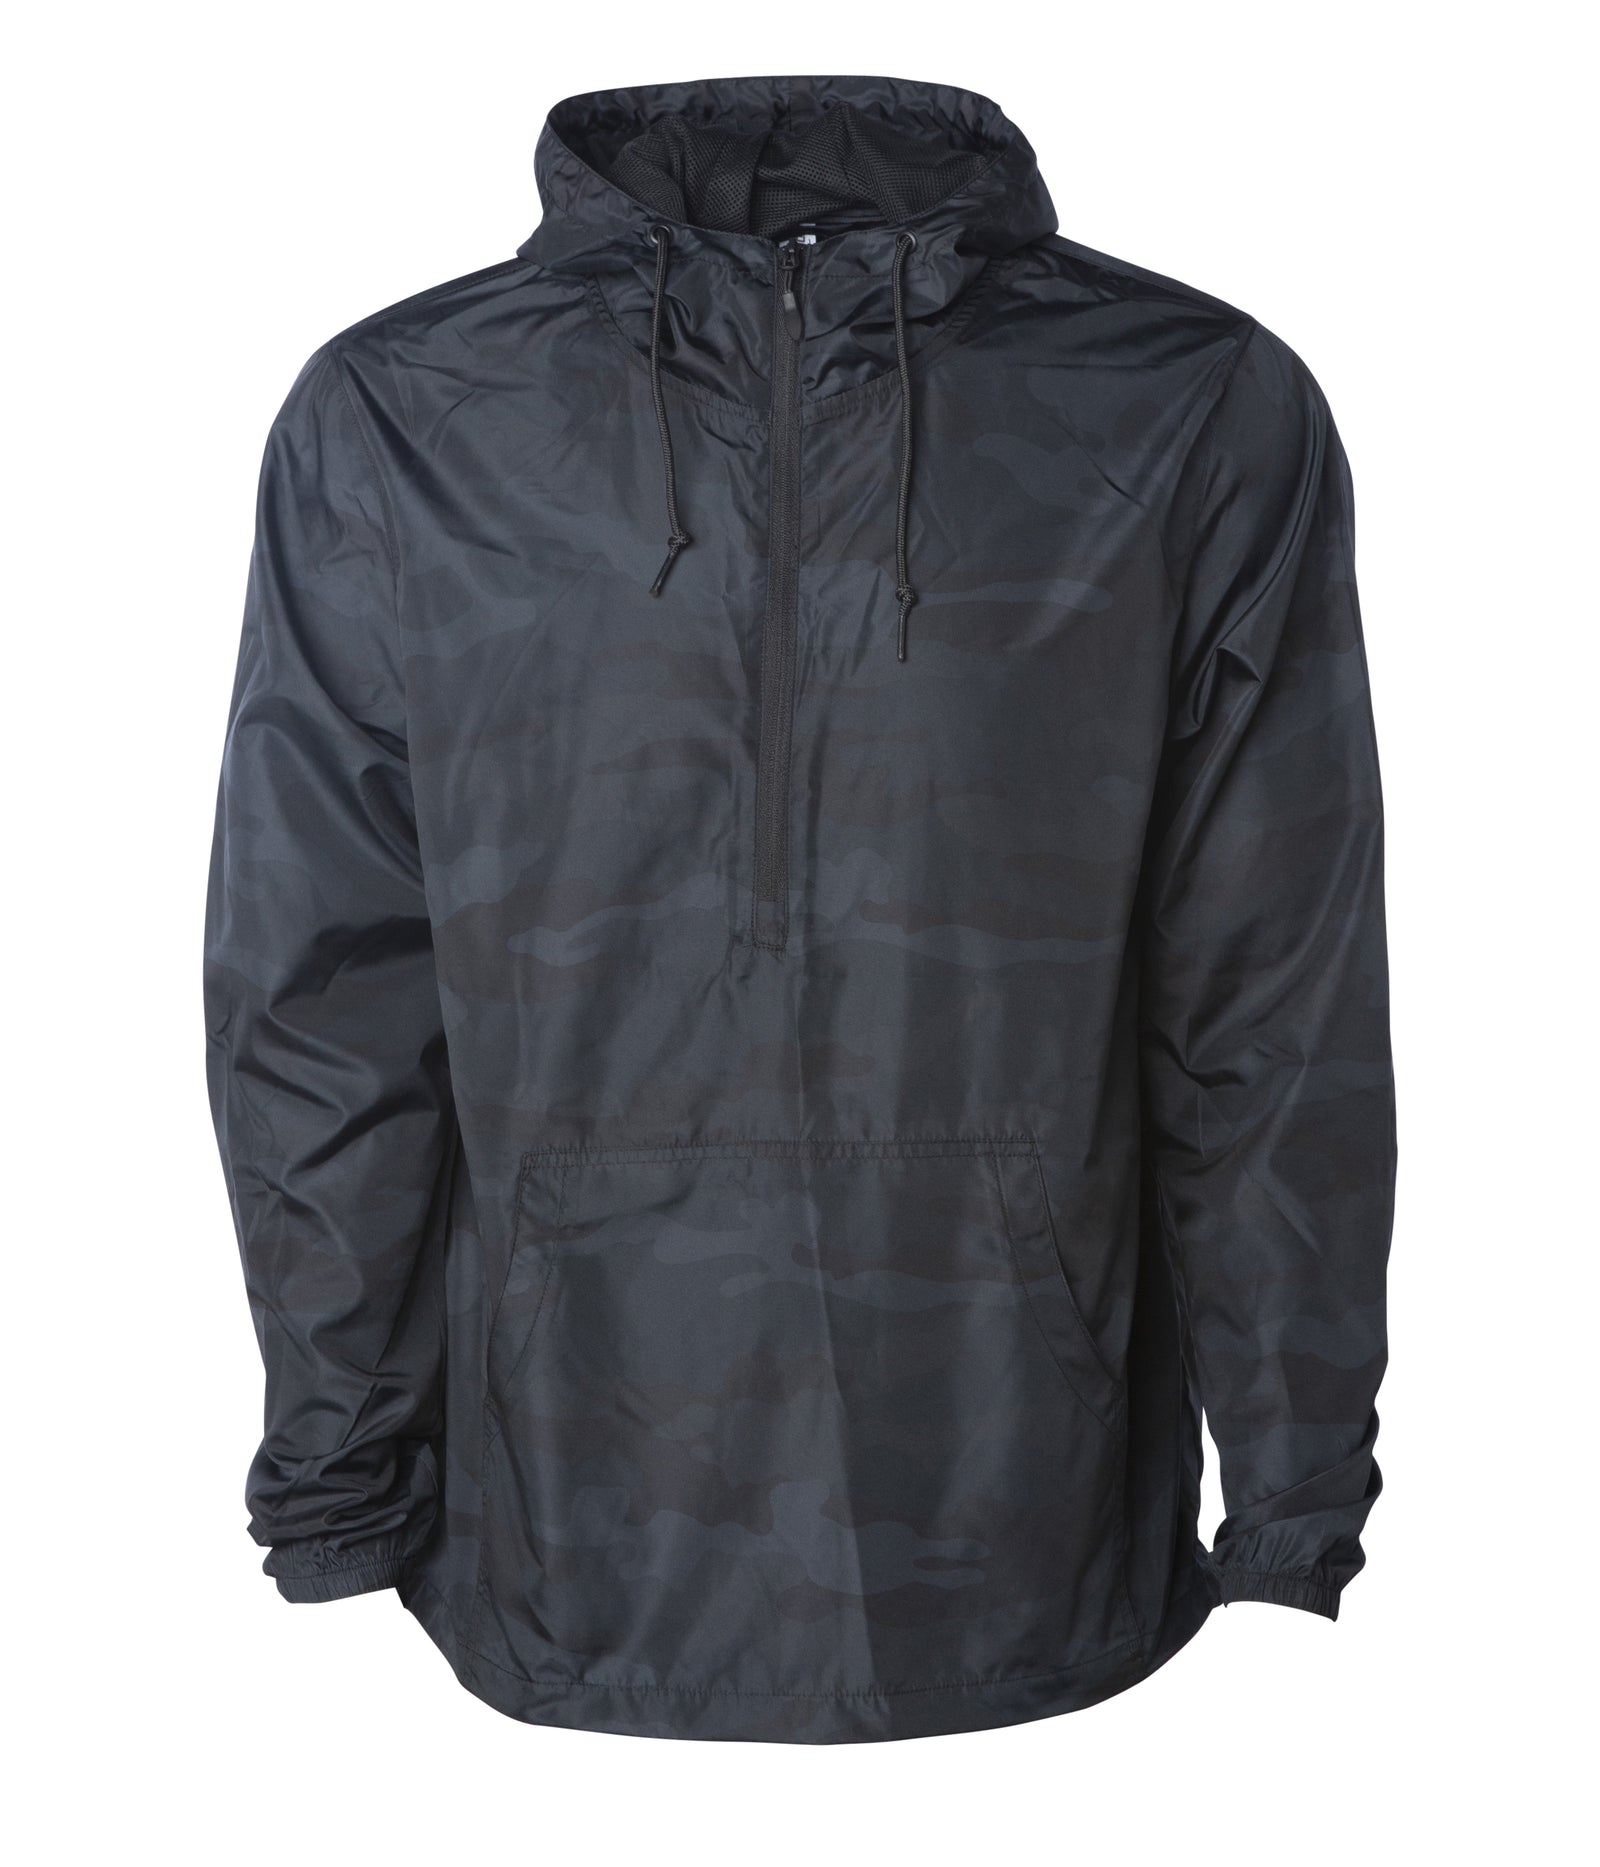 Pullover Windbreaker Anorak Jacket | Independent Trading Co ...